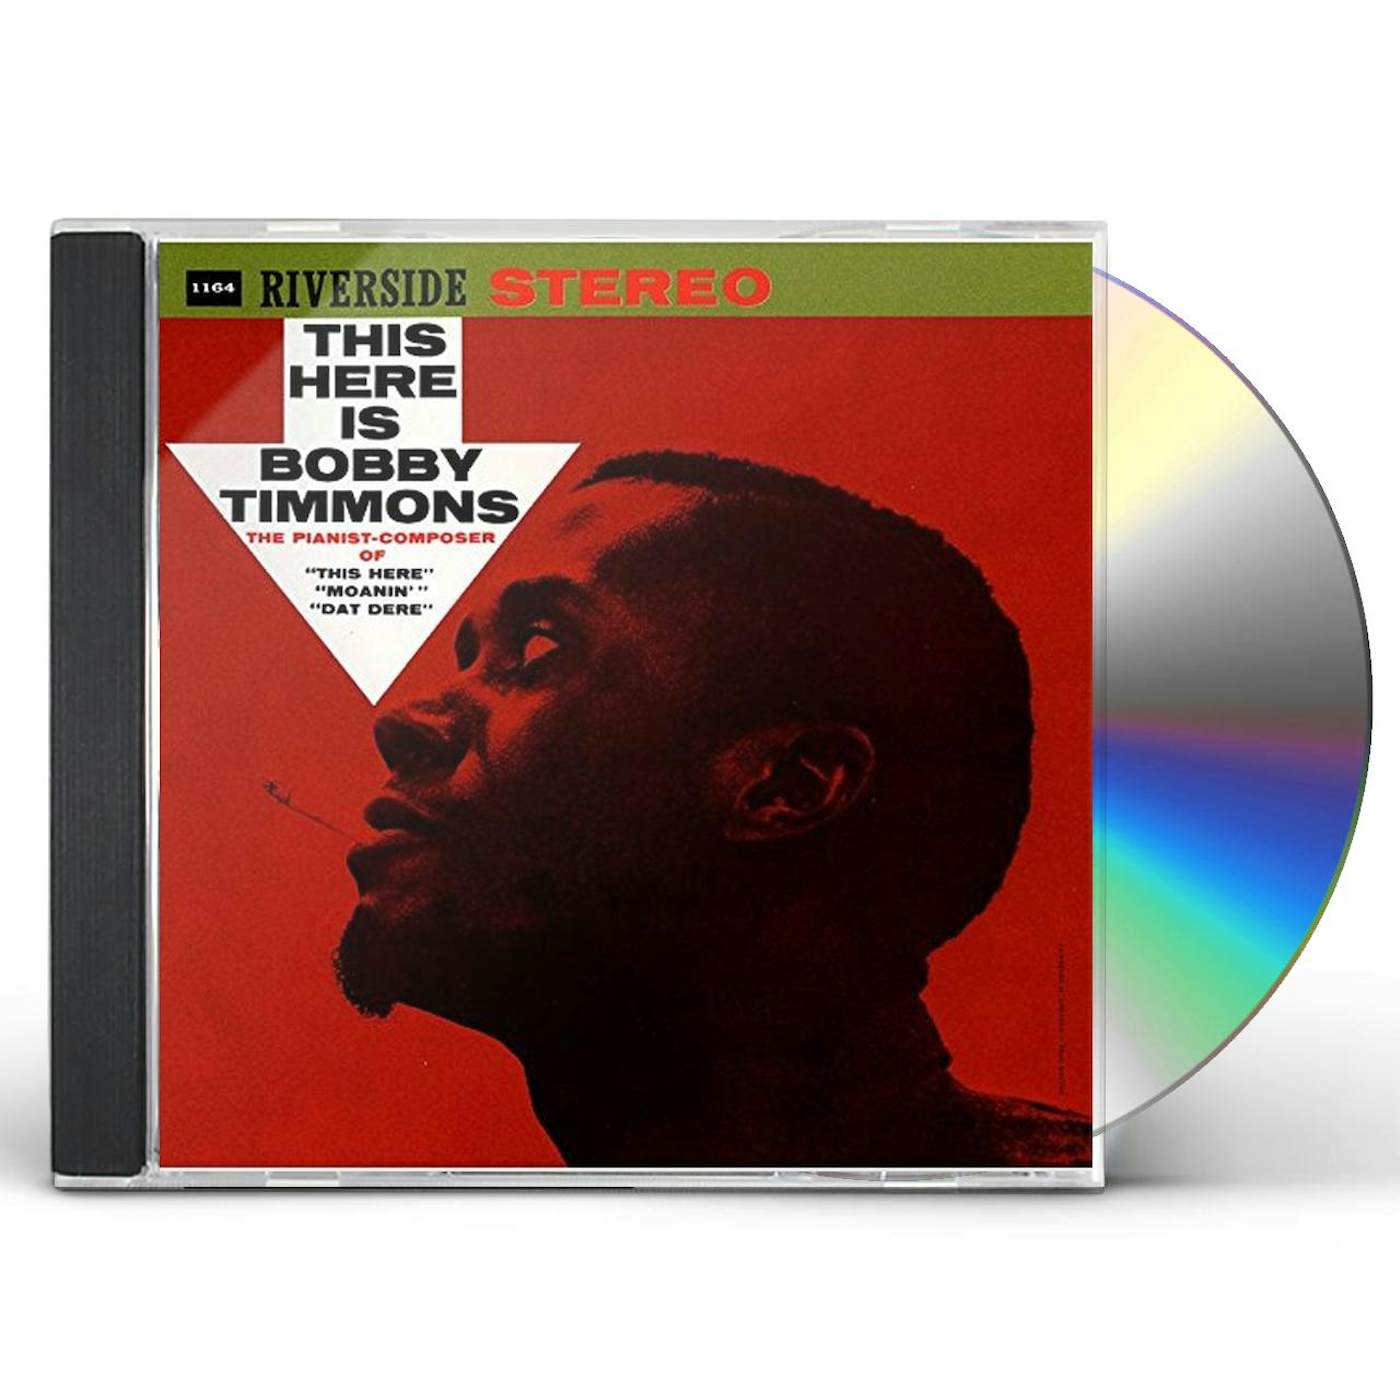 Bobby Timmons THIS HERE IS CD